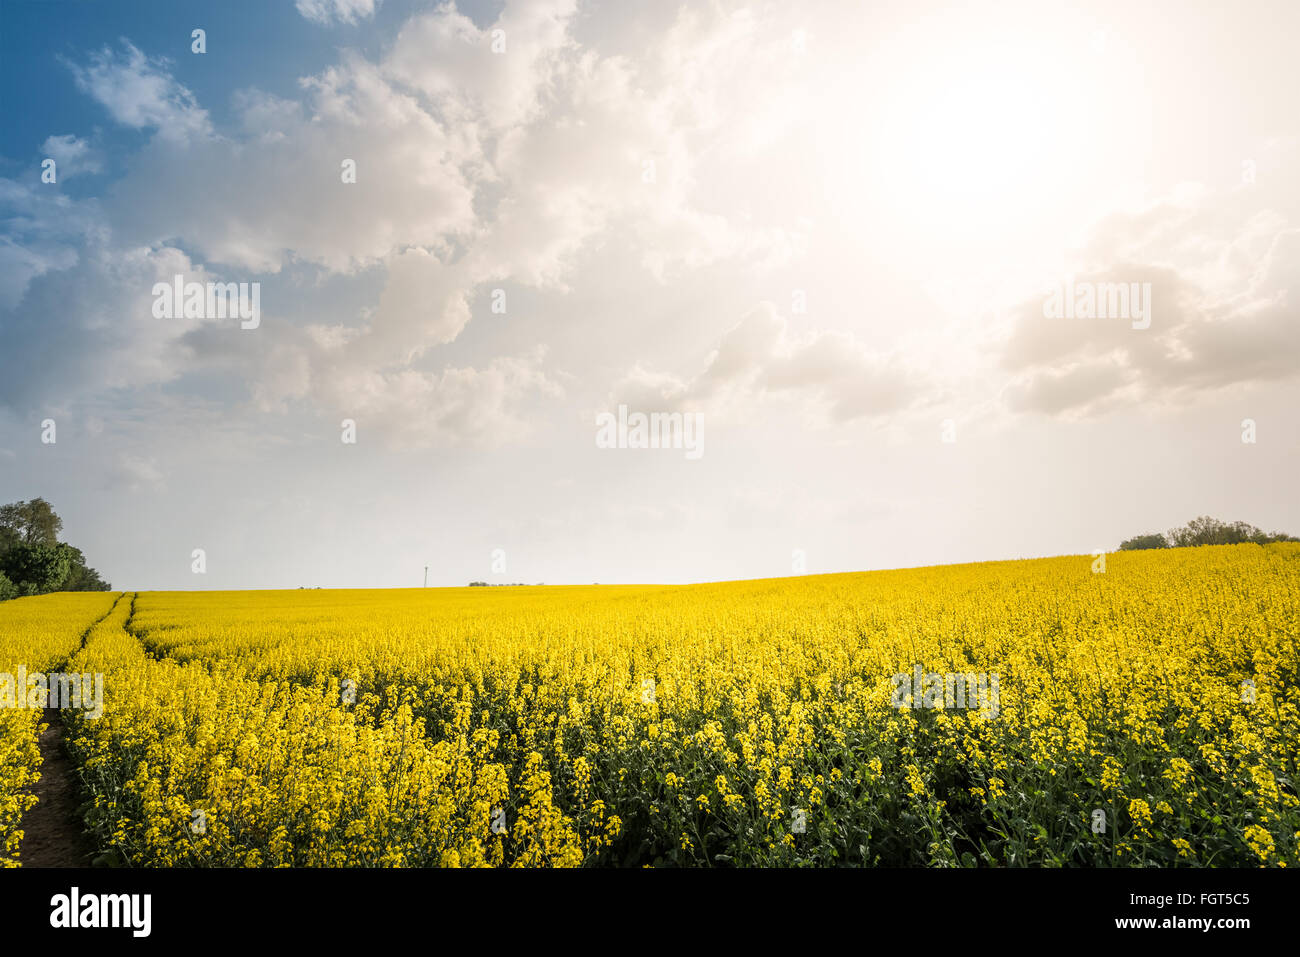 Sunset or sunrise over beautiful field with yellow flower. Blue sky and clouds in background. Dramatic scenery with sun glowing Stock Photo